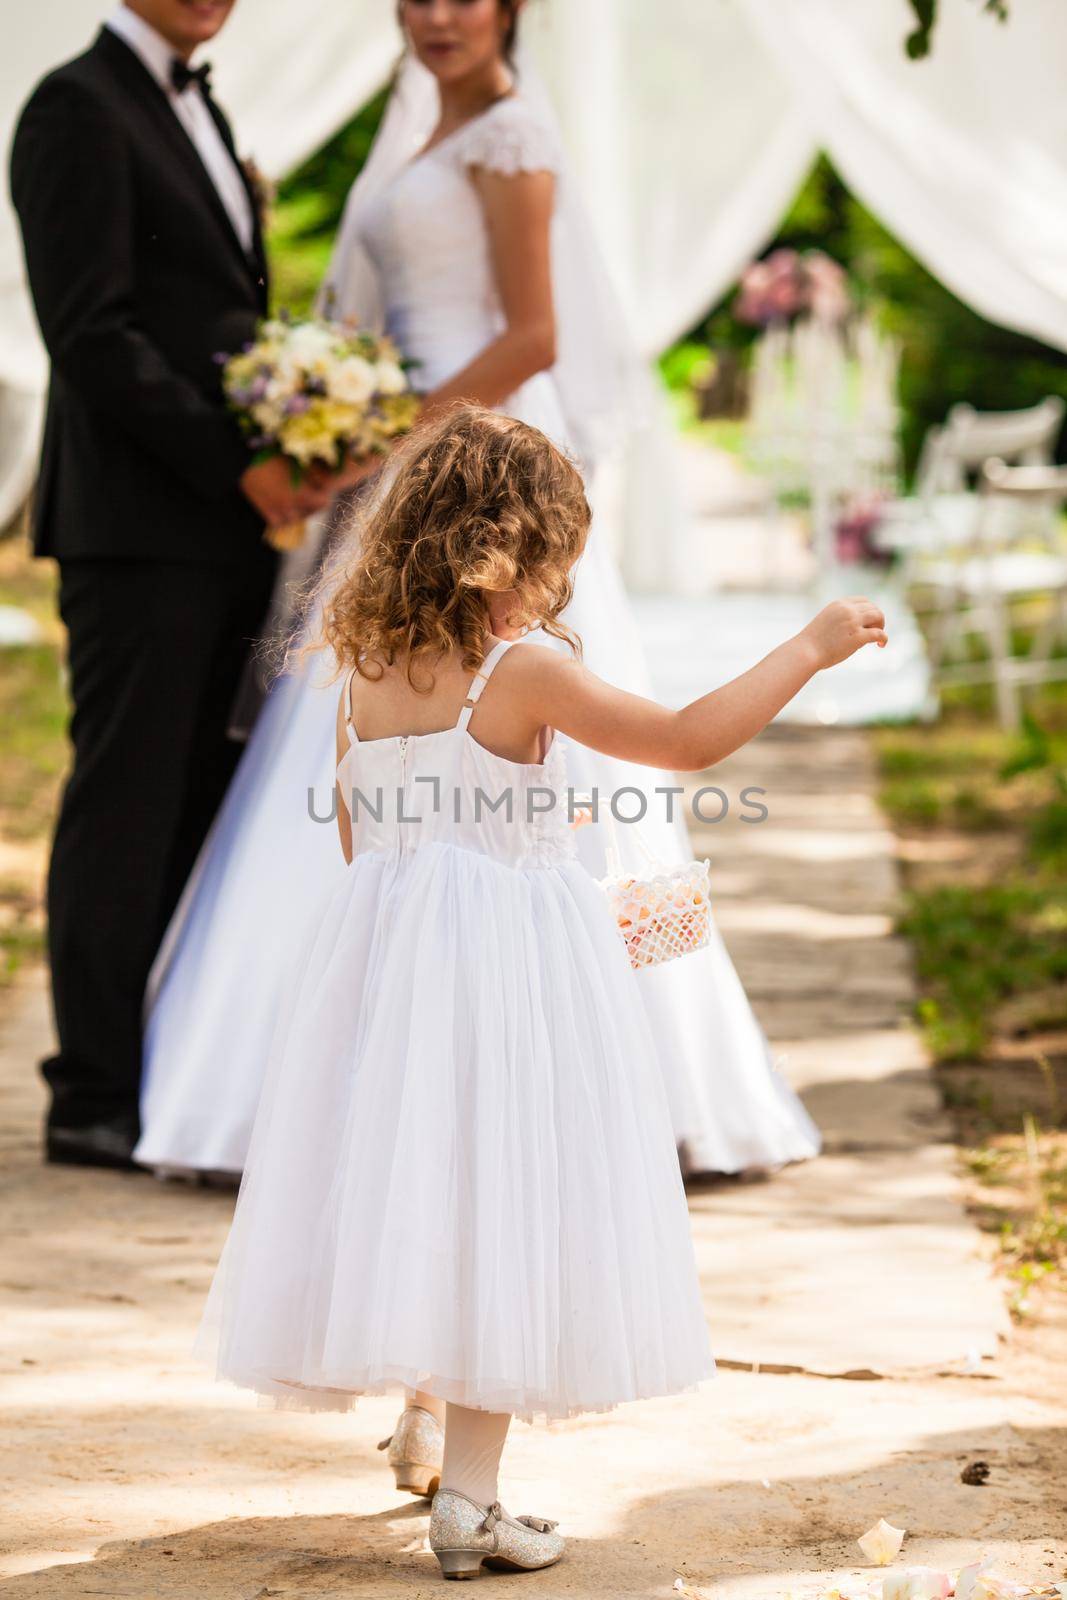 Cute little bridesmaid with a basket in which the petals of roses looks into the camera with wedding couple in background